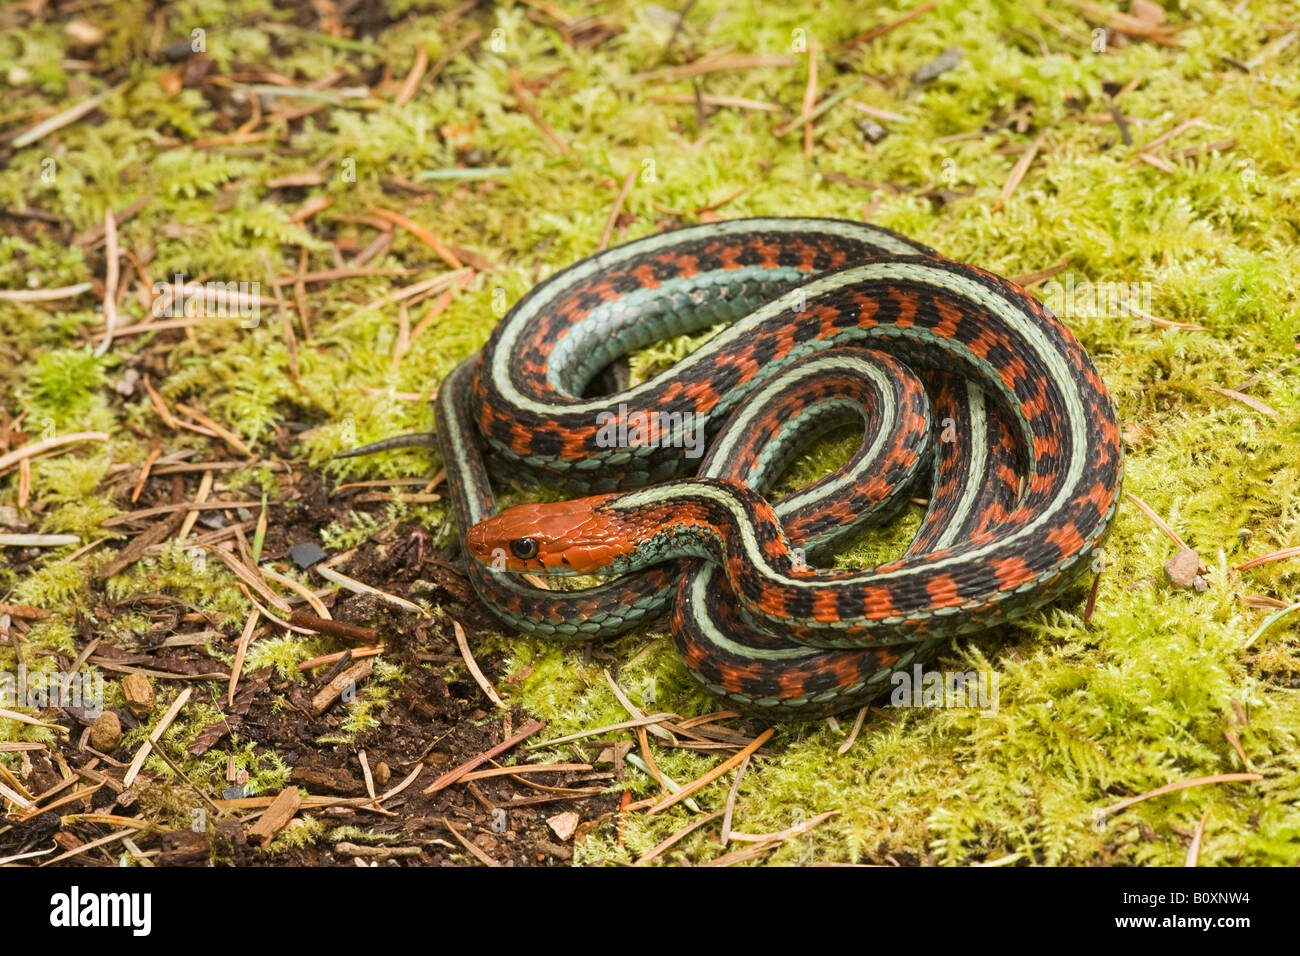 California Red sided Garter Snake Thamnophis sirtalis infernalis California United States. Sometimes known as Thamnophis sirtalis tetrataenia. Stock Photo